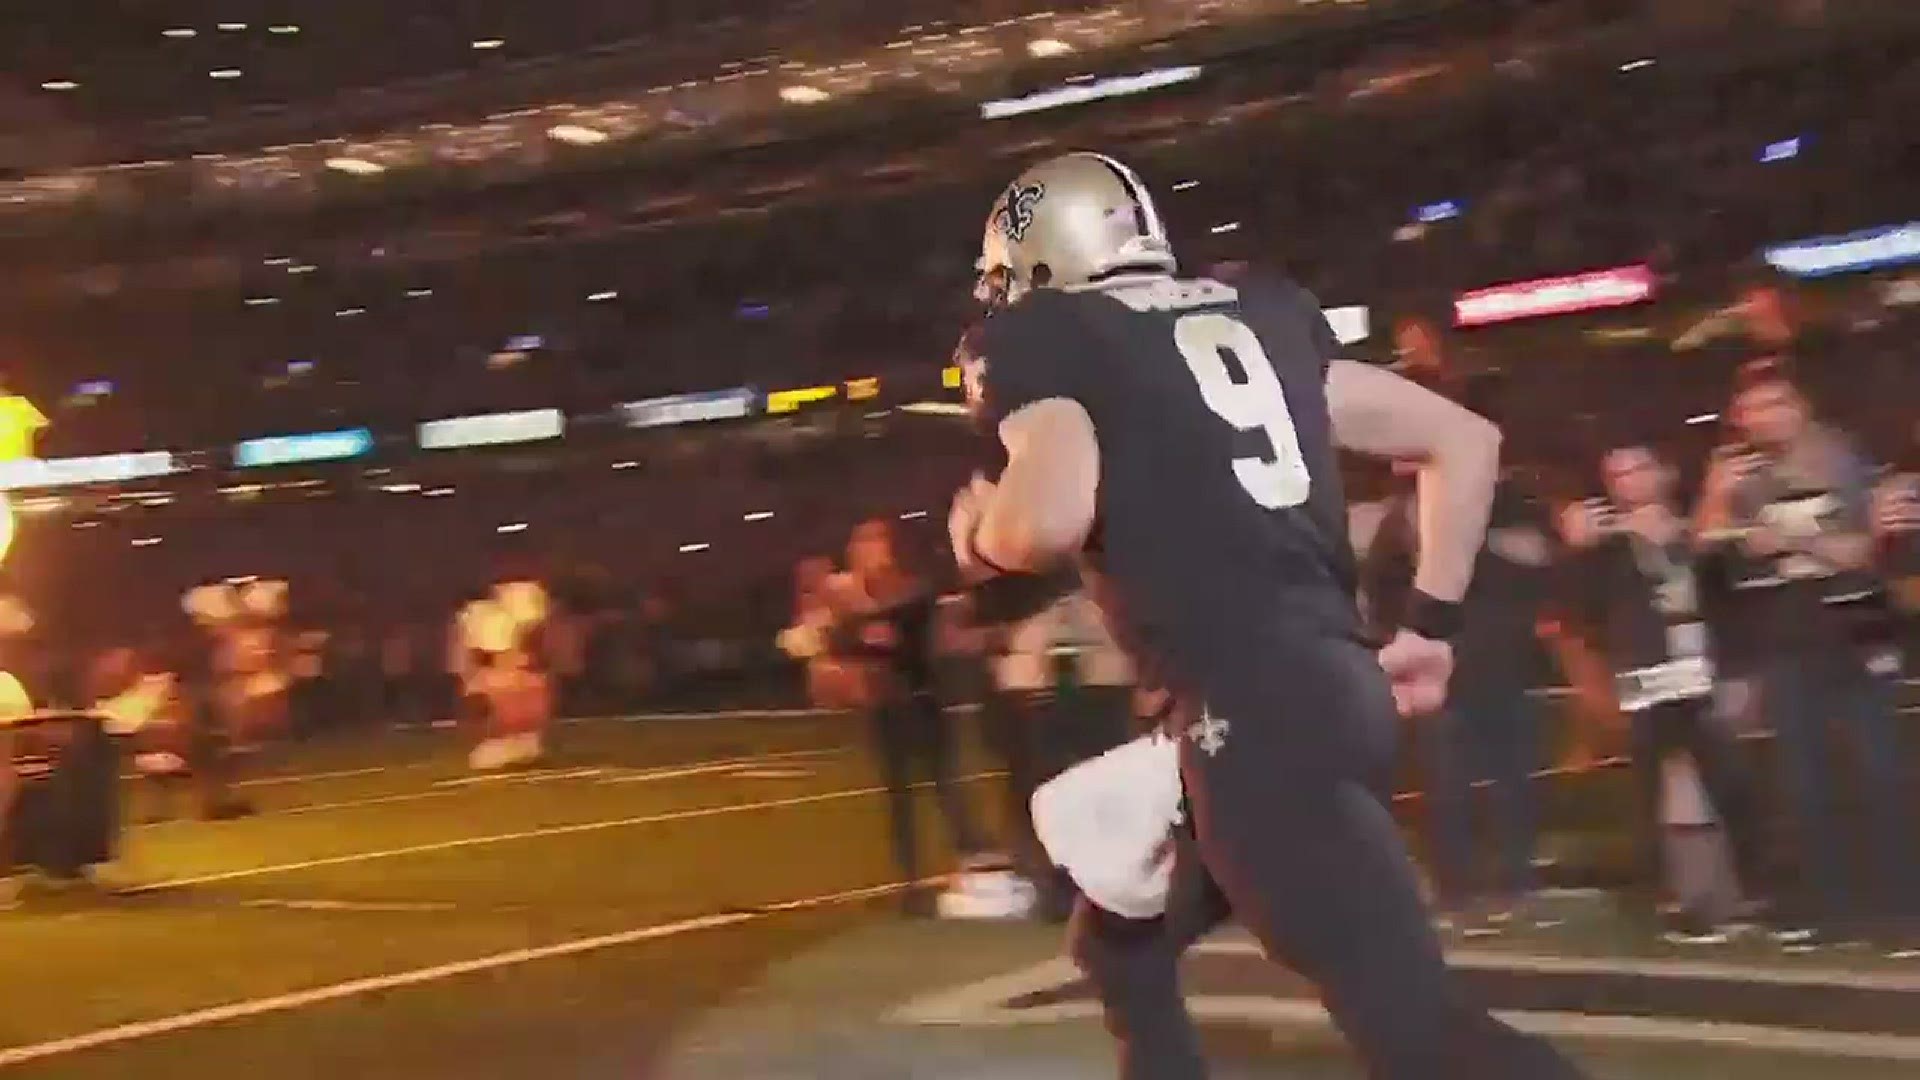 Over his 20-year NFL career, Drew Brees broke several records and attained the rare title of Super Bowl MVP.